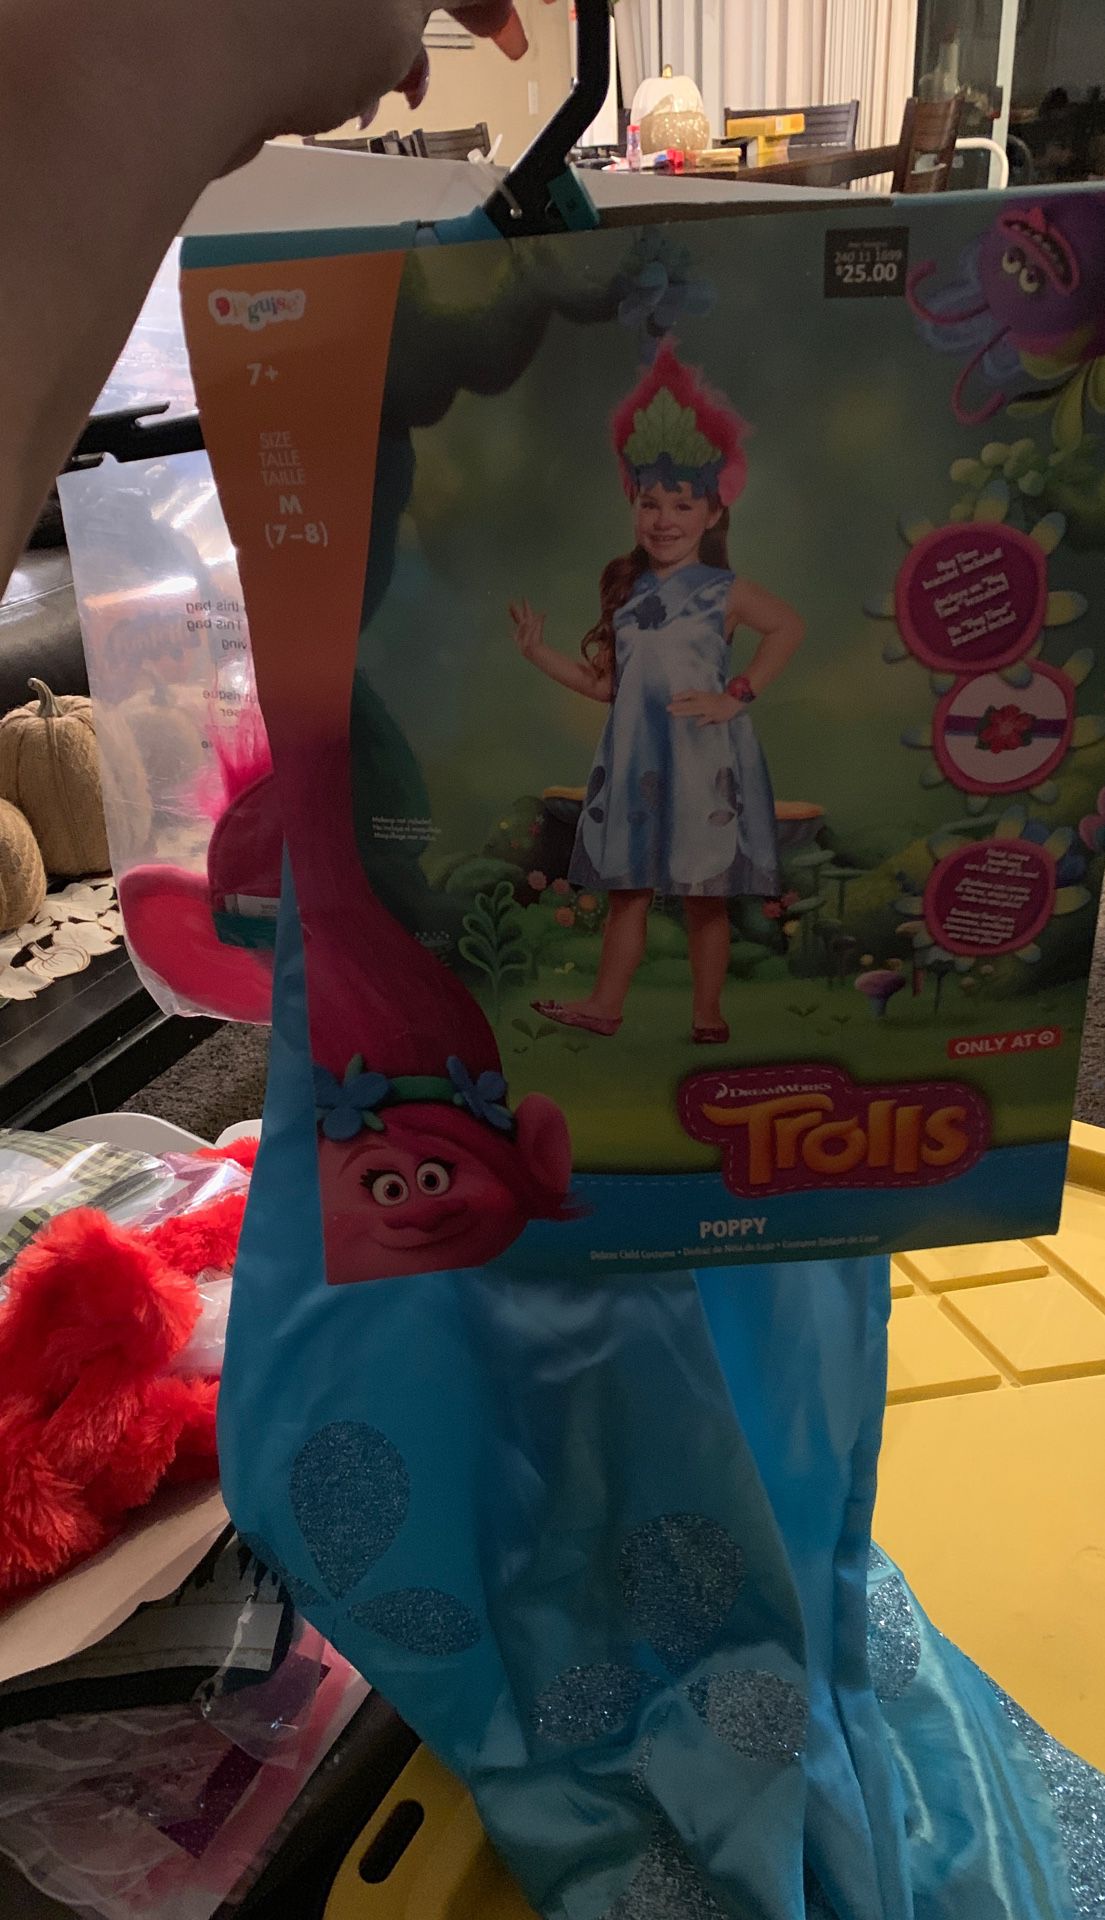 Trolls Poppy deluxe child costume Size medium 7-8 girls retails $25 I’m selling for $12 obo includes Hug time bracelet, dress and floral crown with e